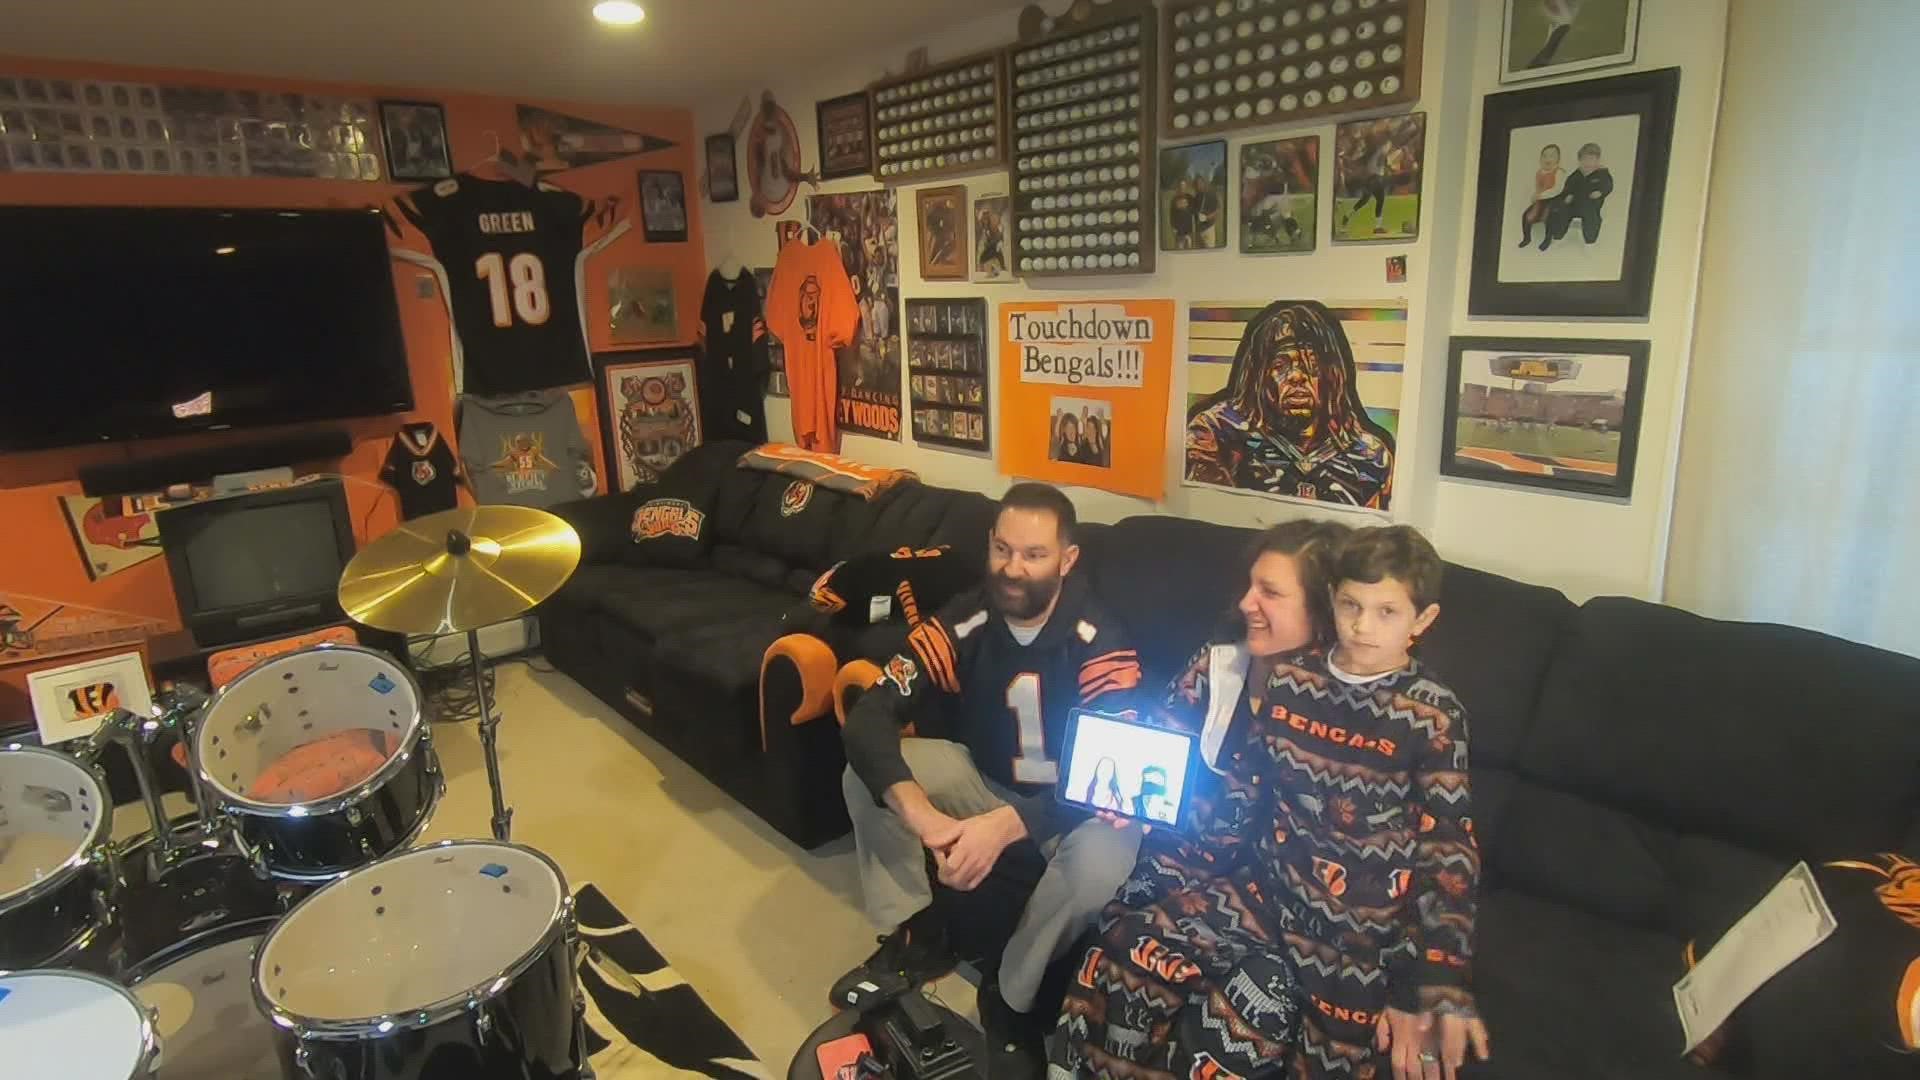 Despite his wedding day and the birth of his three kids, Brodsky said a Bengals Super Bowl win would be the best day of his life. He has the basement to prove it.